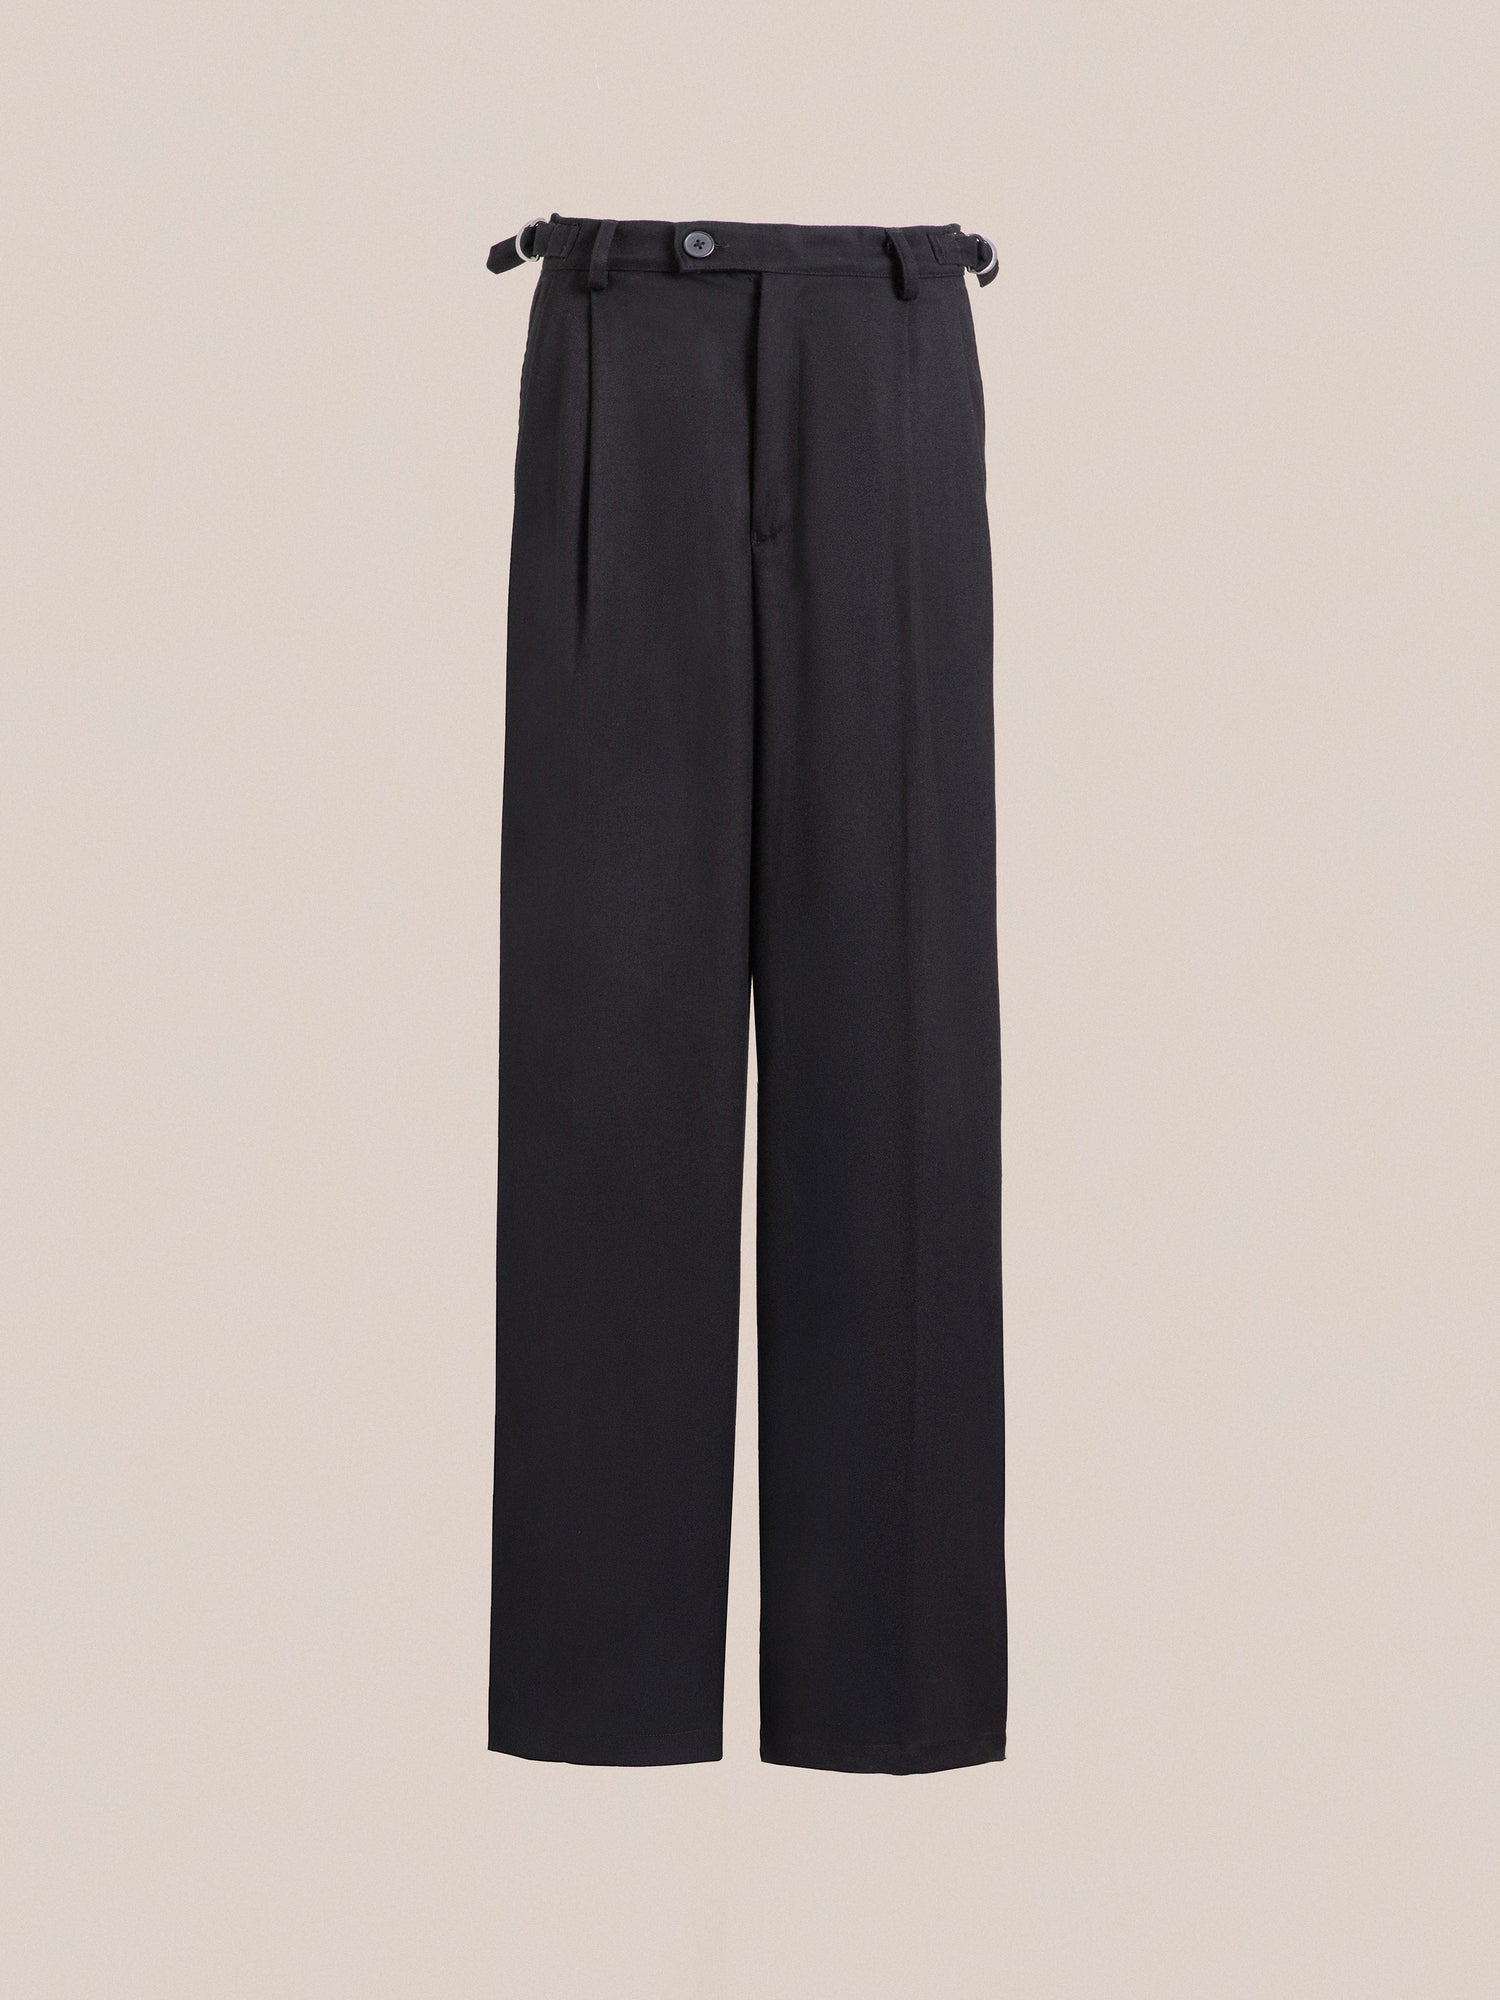 A pair of Found pleated trousers with a belted waist, featuring a relaxed fit.